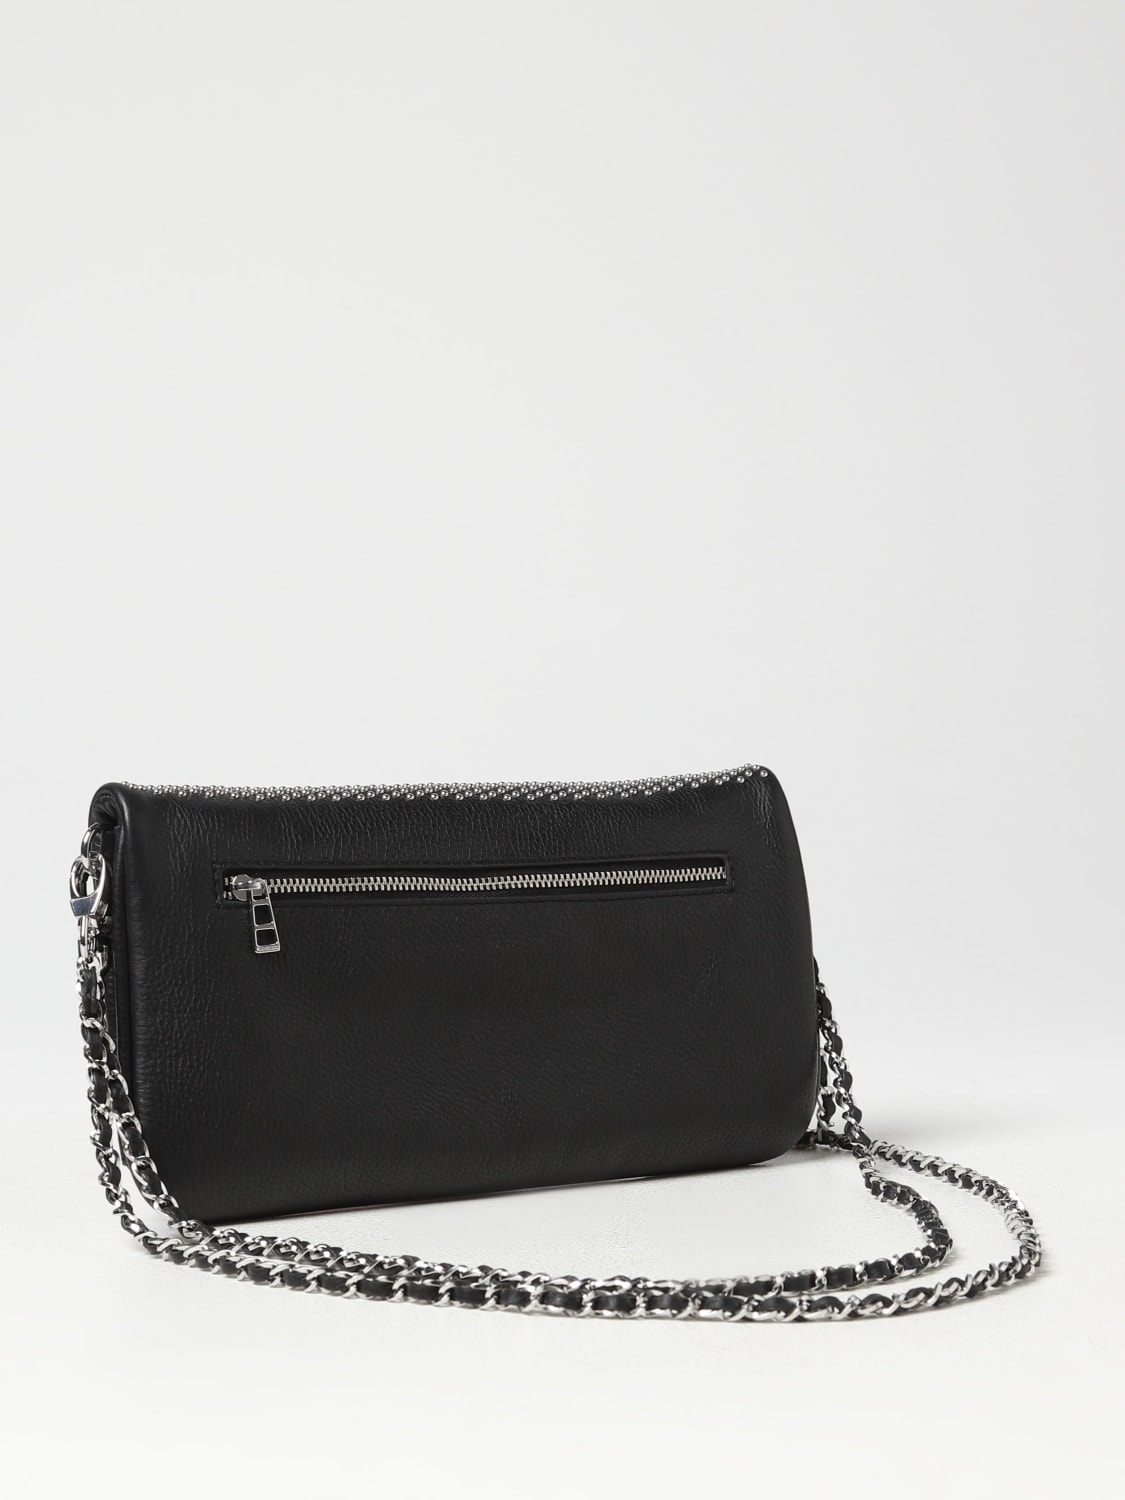 Zadig & Voltaire Bags, Fashion for Women